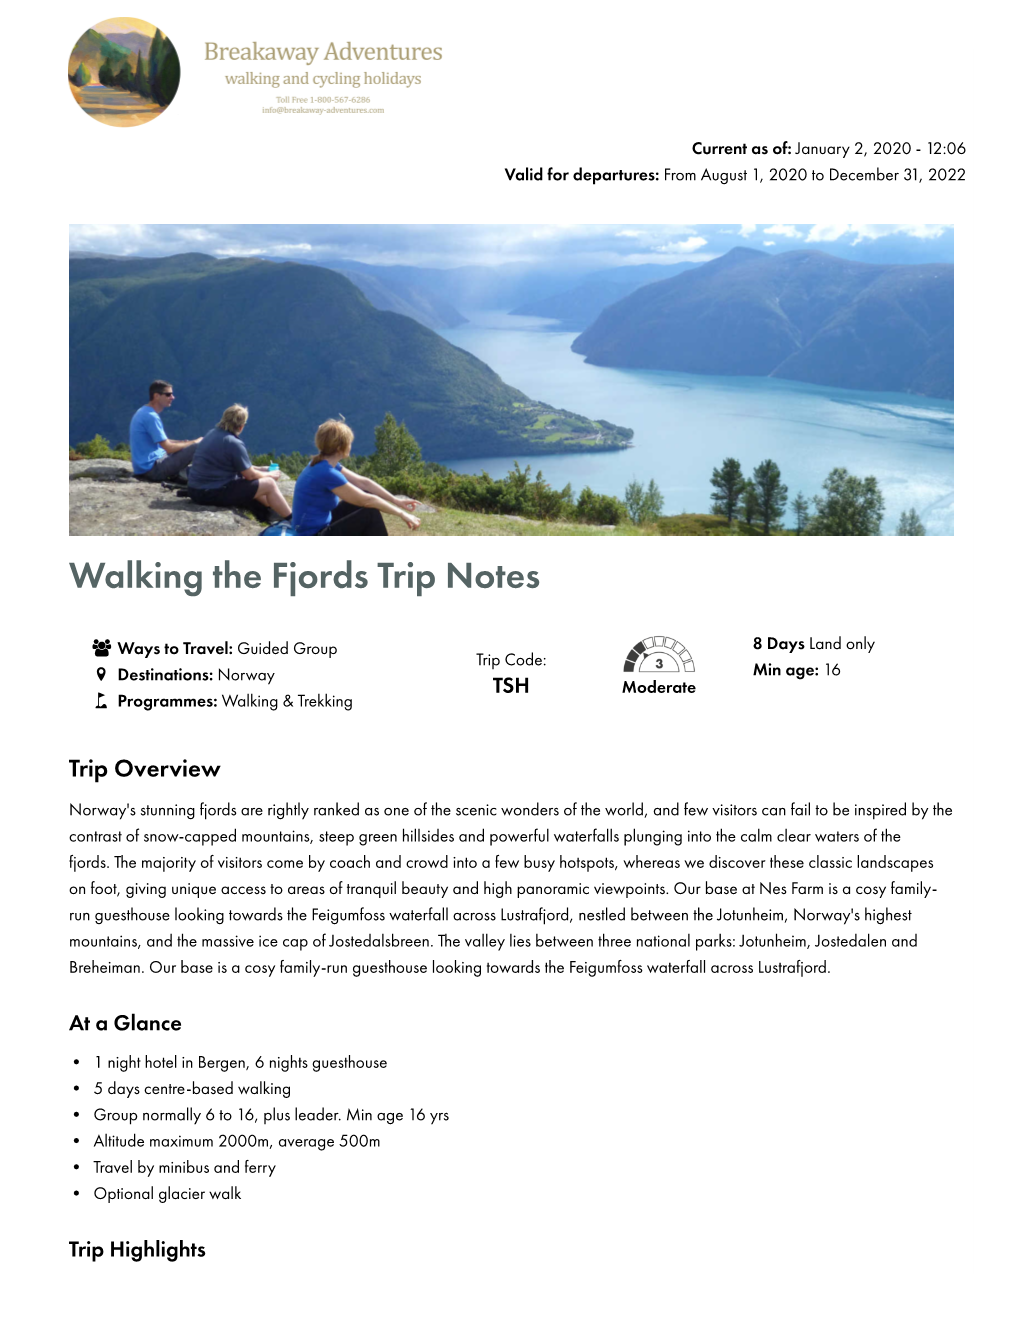 Walking the Fjords Trip Notes